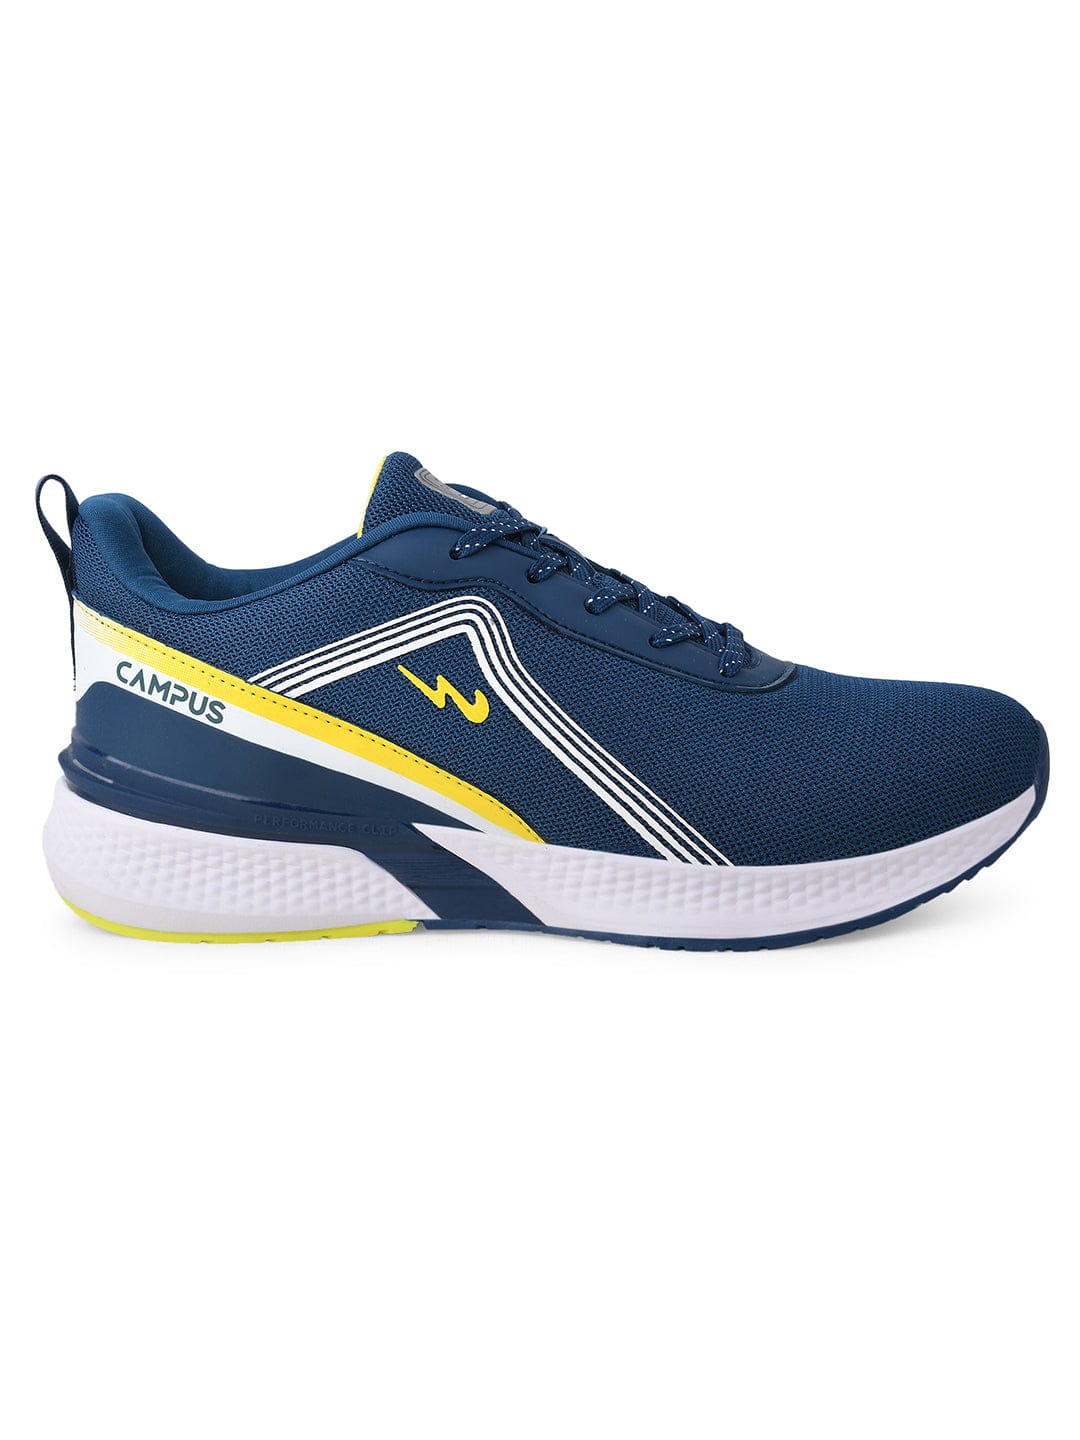 Buy CAMP FAST Blue Men's Running Shoes online | Campus Shoes